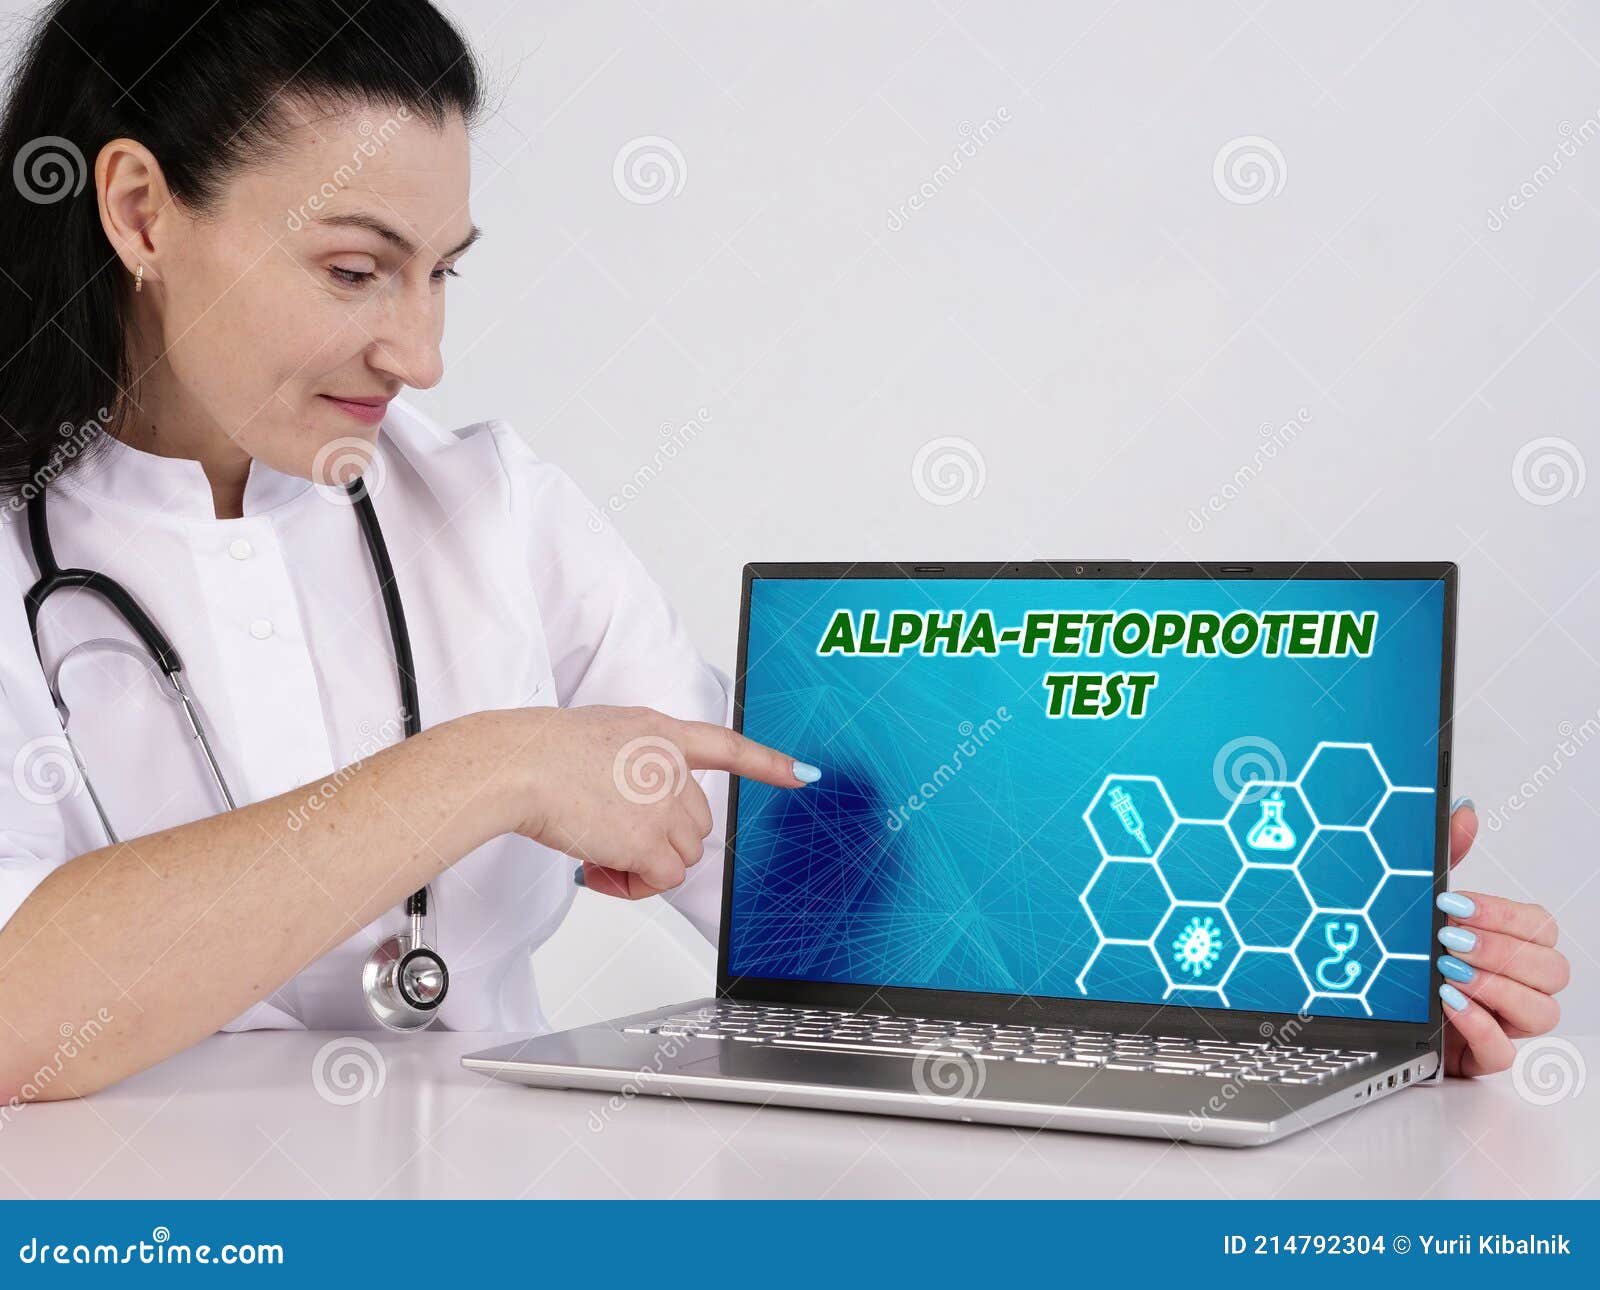 alpha-fetoprotein test phrase on the screen. medico use internet technologies at office